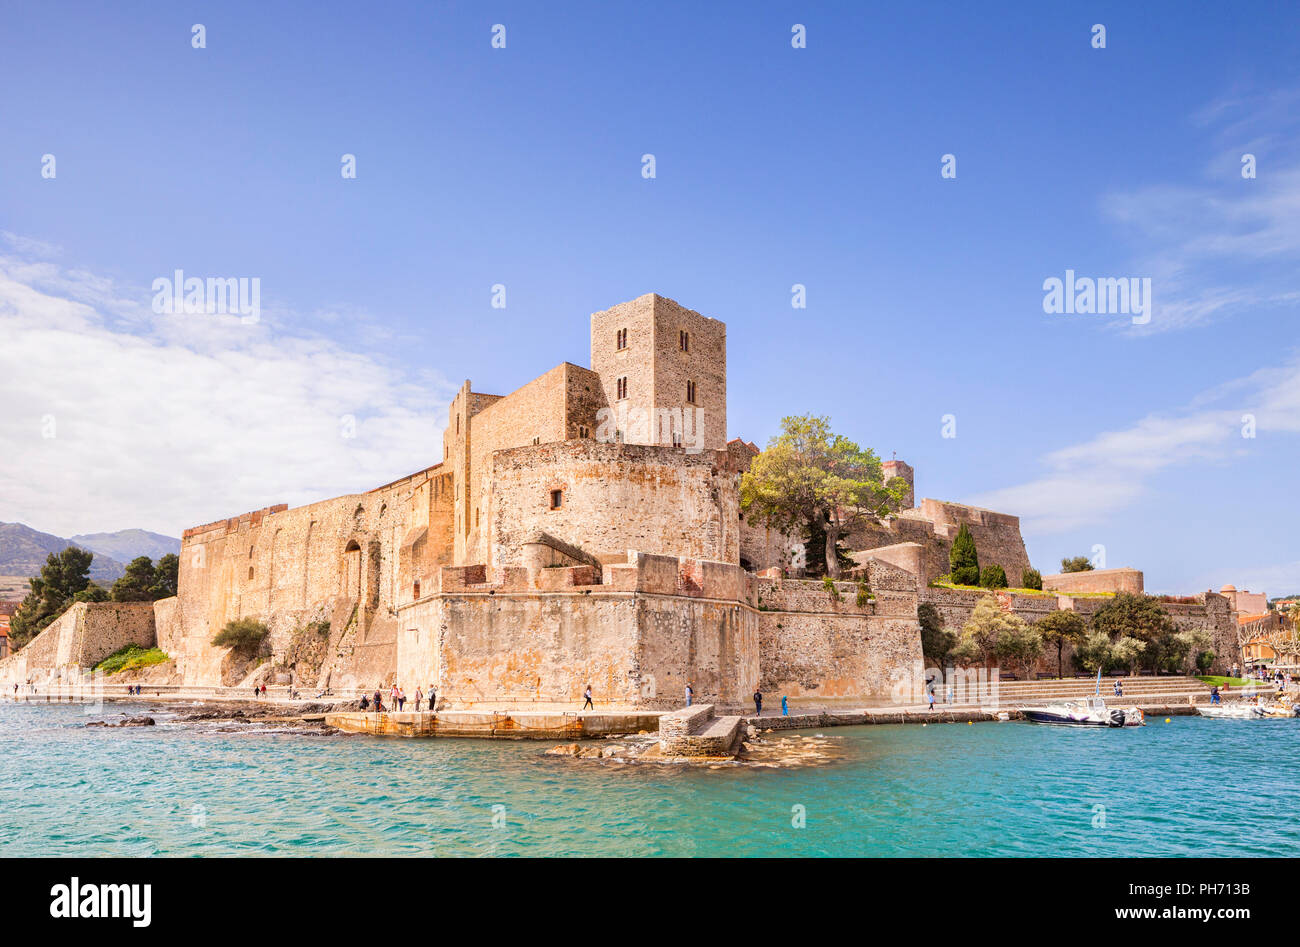 Royal Chateau, Collioure, Languedoc-Roussillon, Pyrenees-Orientales, Francia. Foto Stock